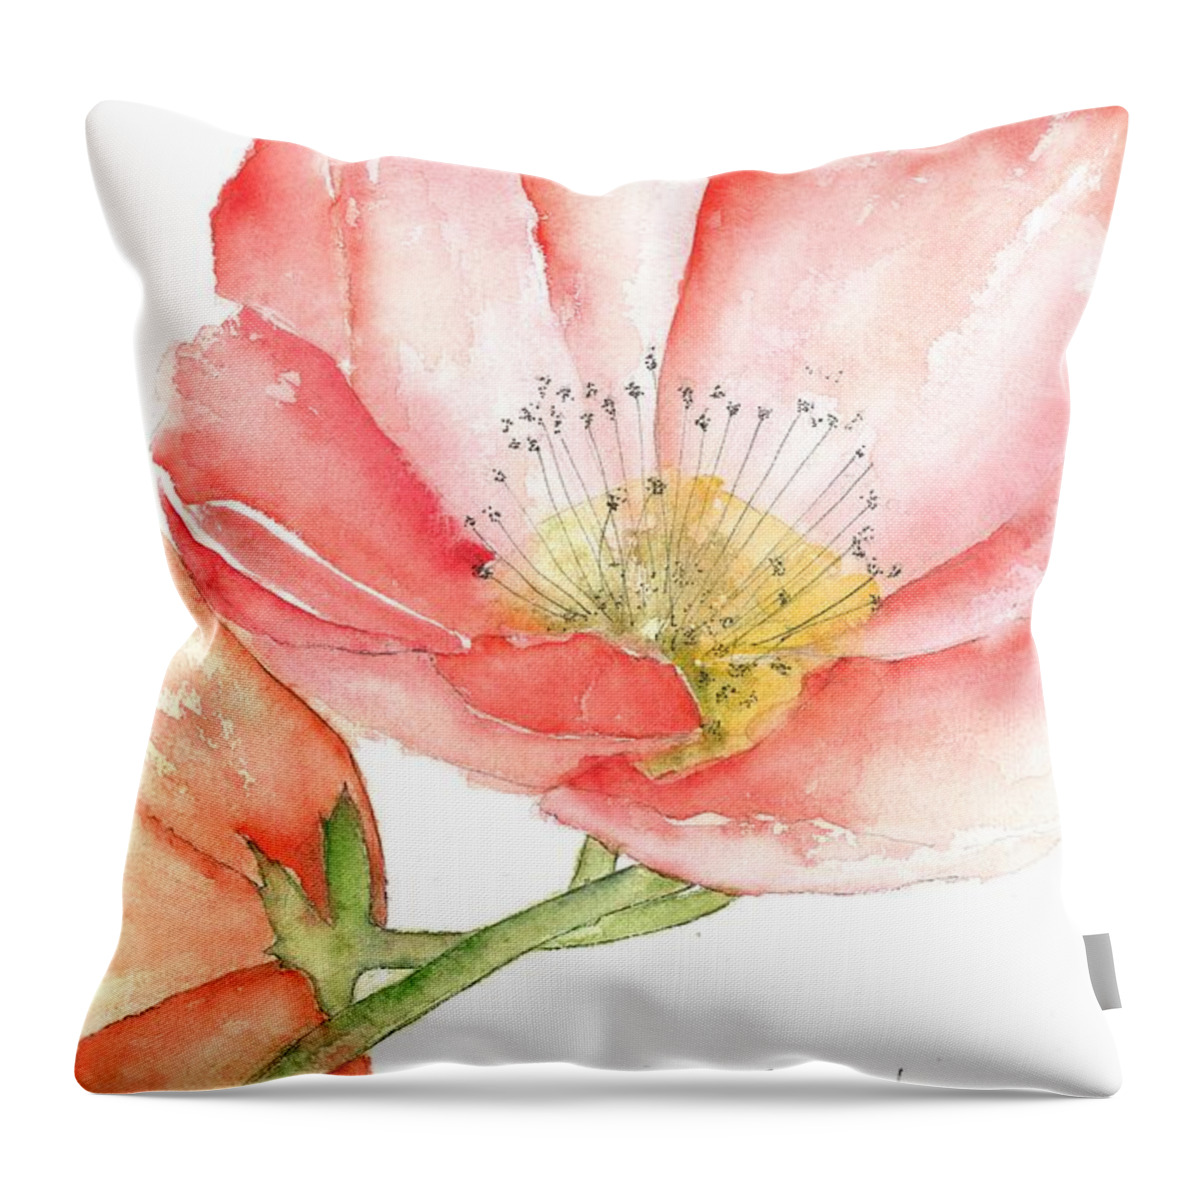 Owl Throw Pillow featuring the painting Poppy Bloom by Sherry Harradence